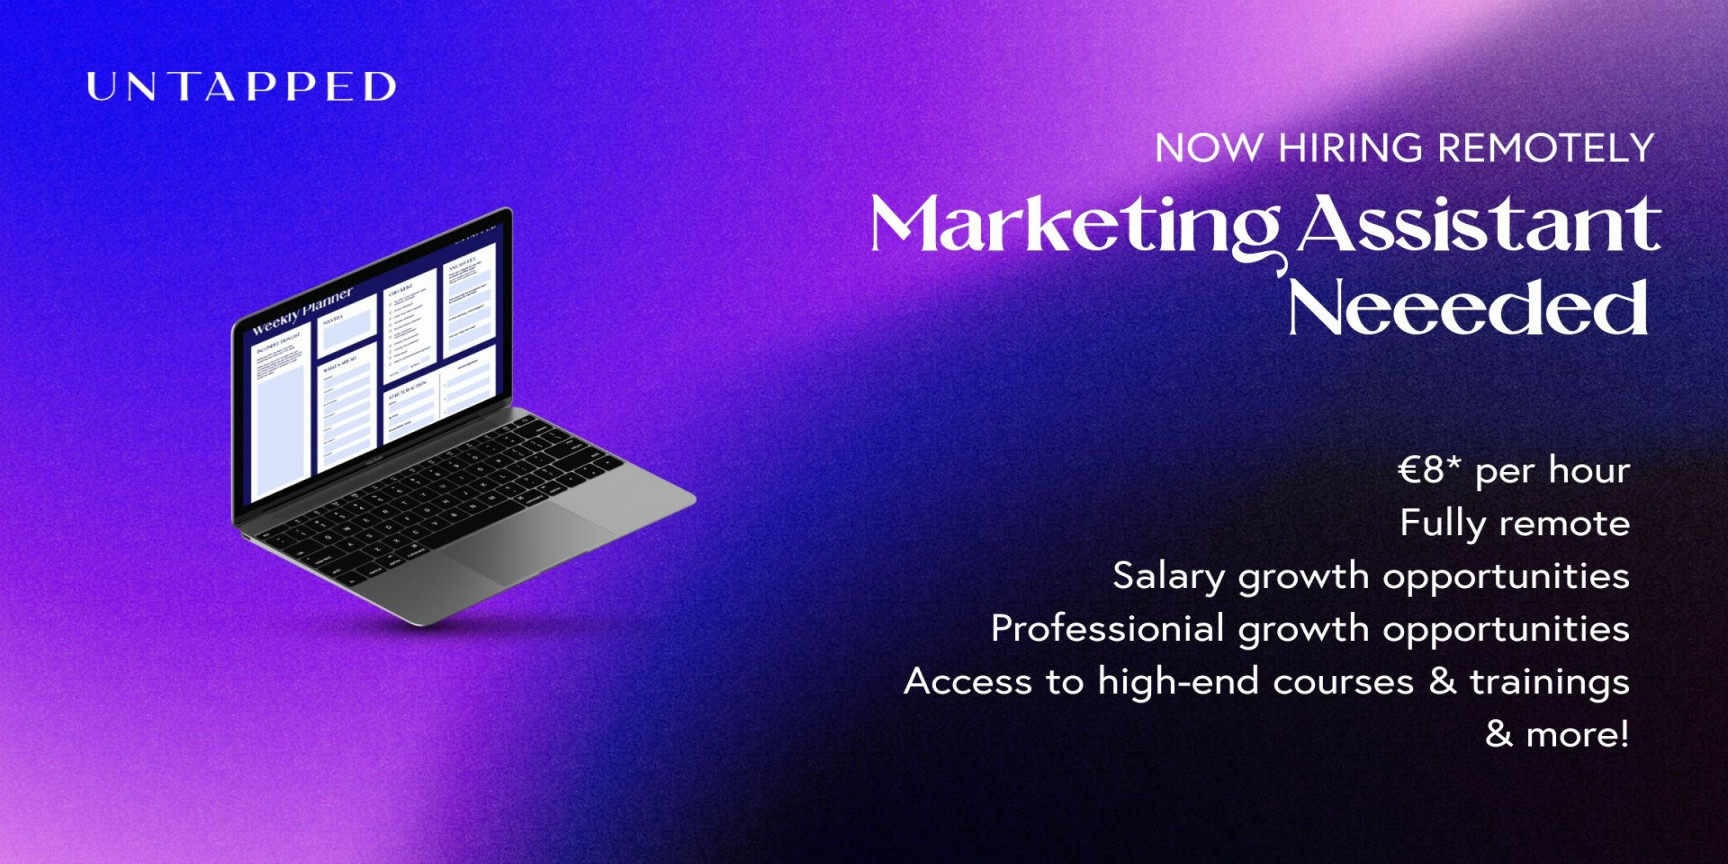 Remote Marketing Assistant Jobs - Remote Mkt Assistant Jobs: Work From Anywhere!